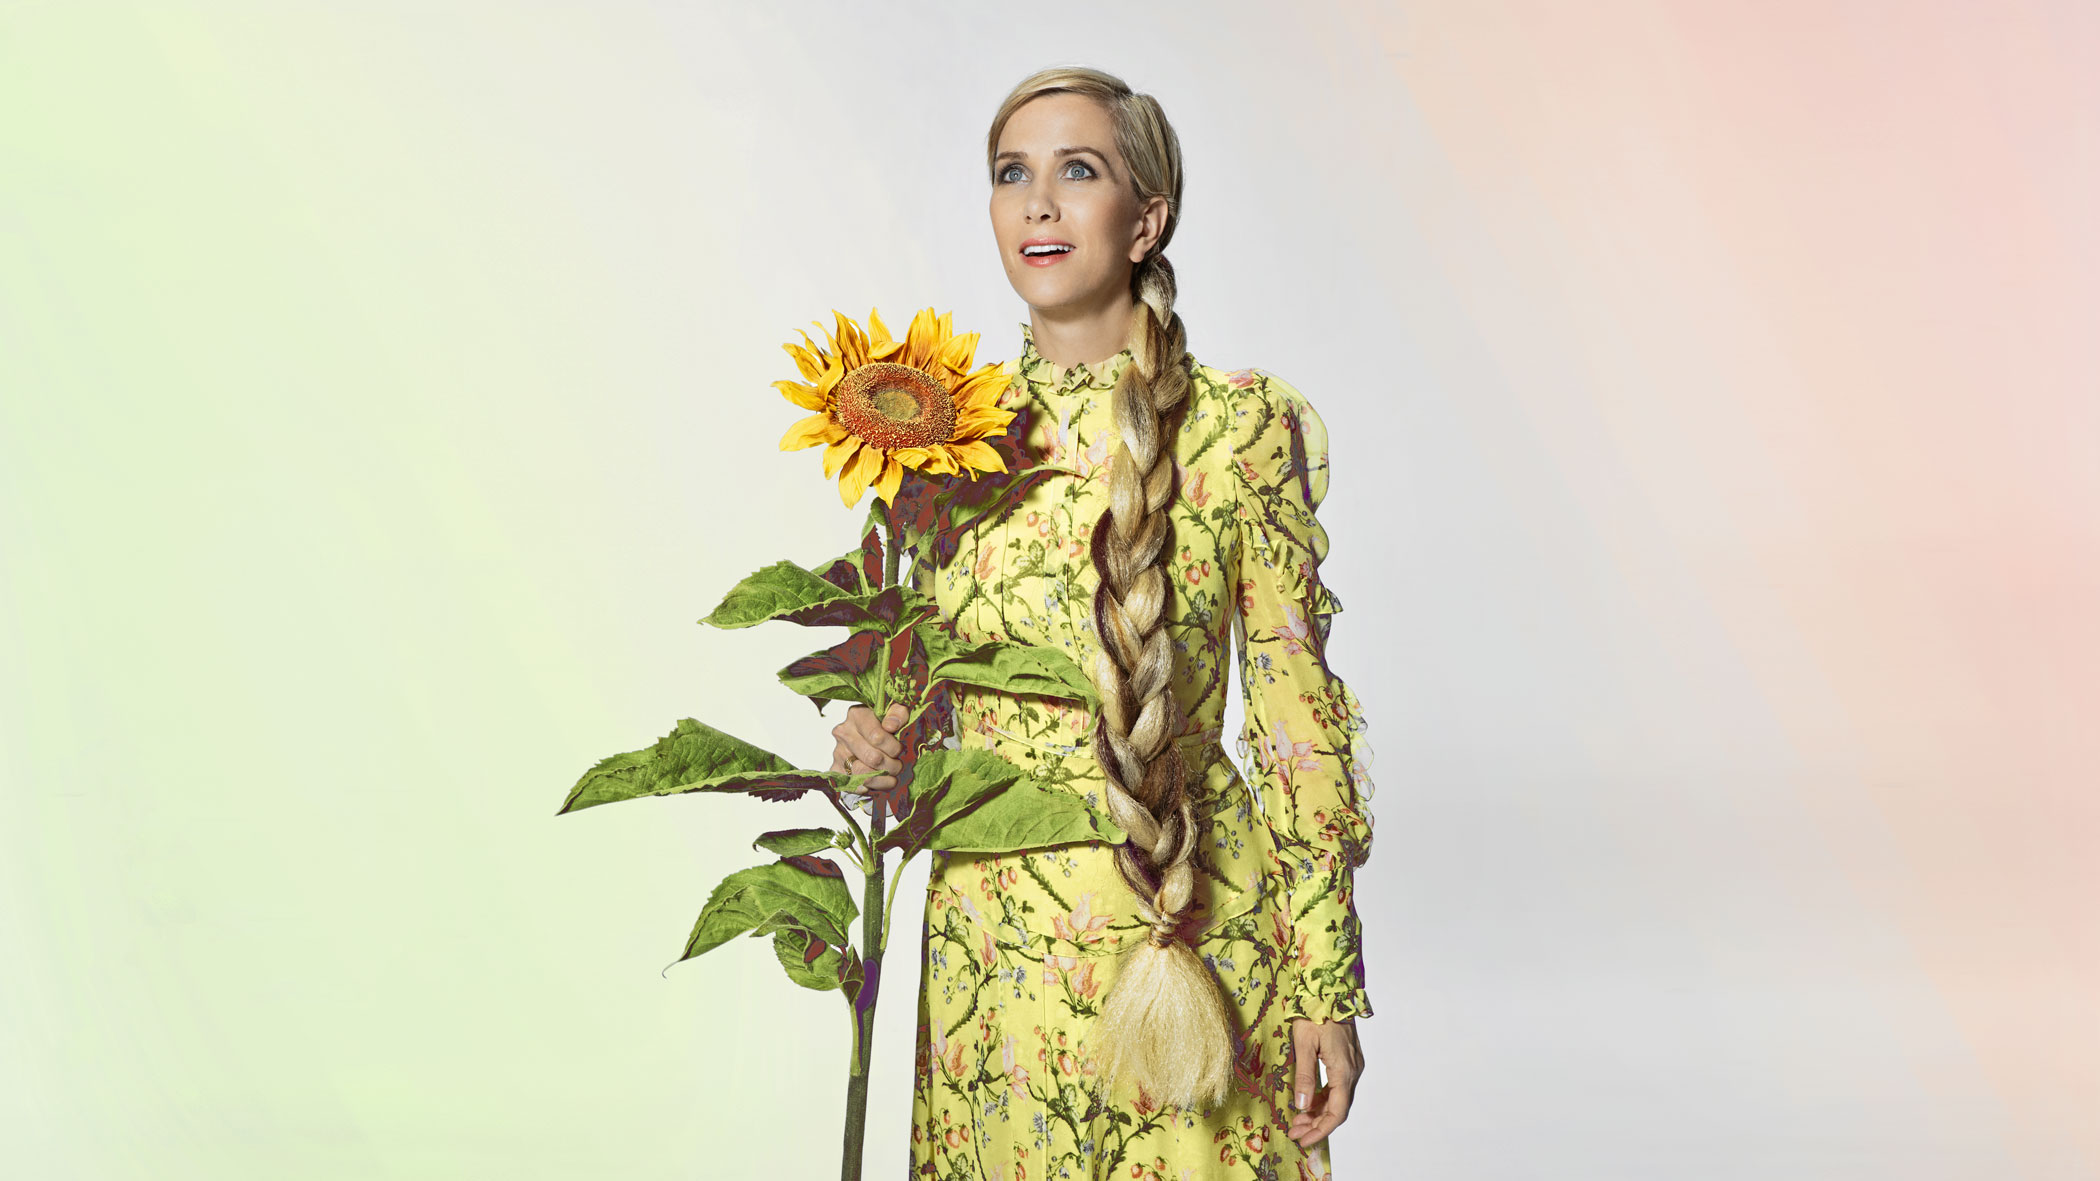 Kristen Wiig with big sunflower and big braid and wearing a yellow dress with flower print.